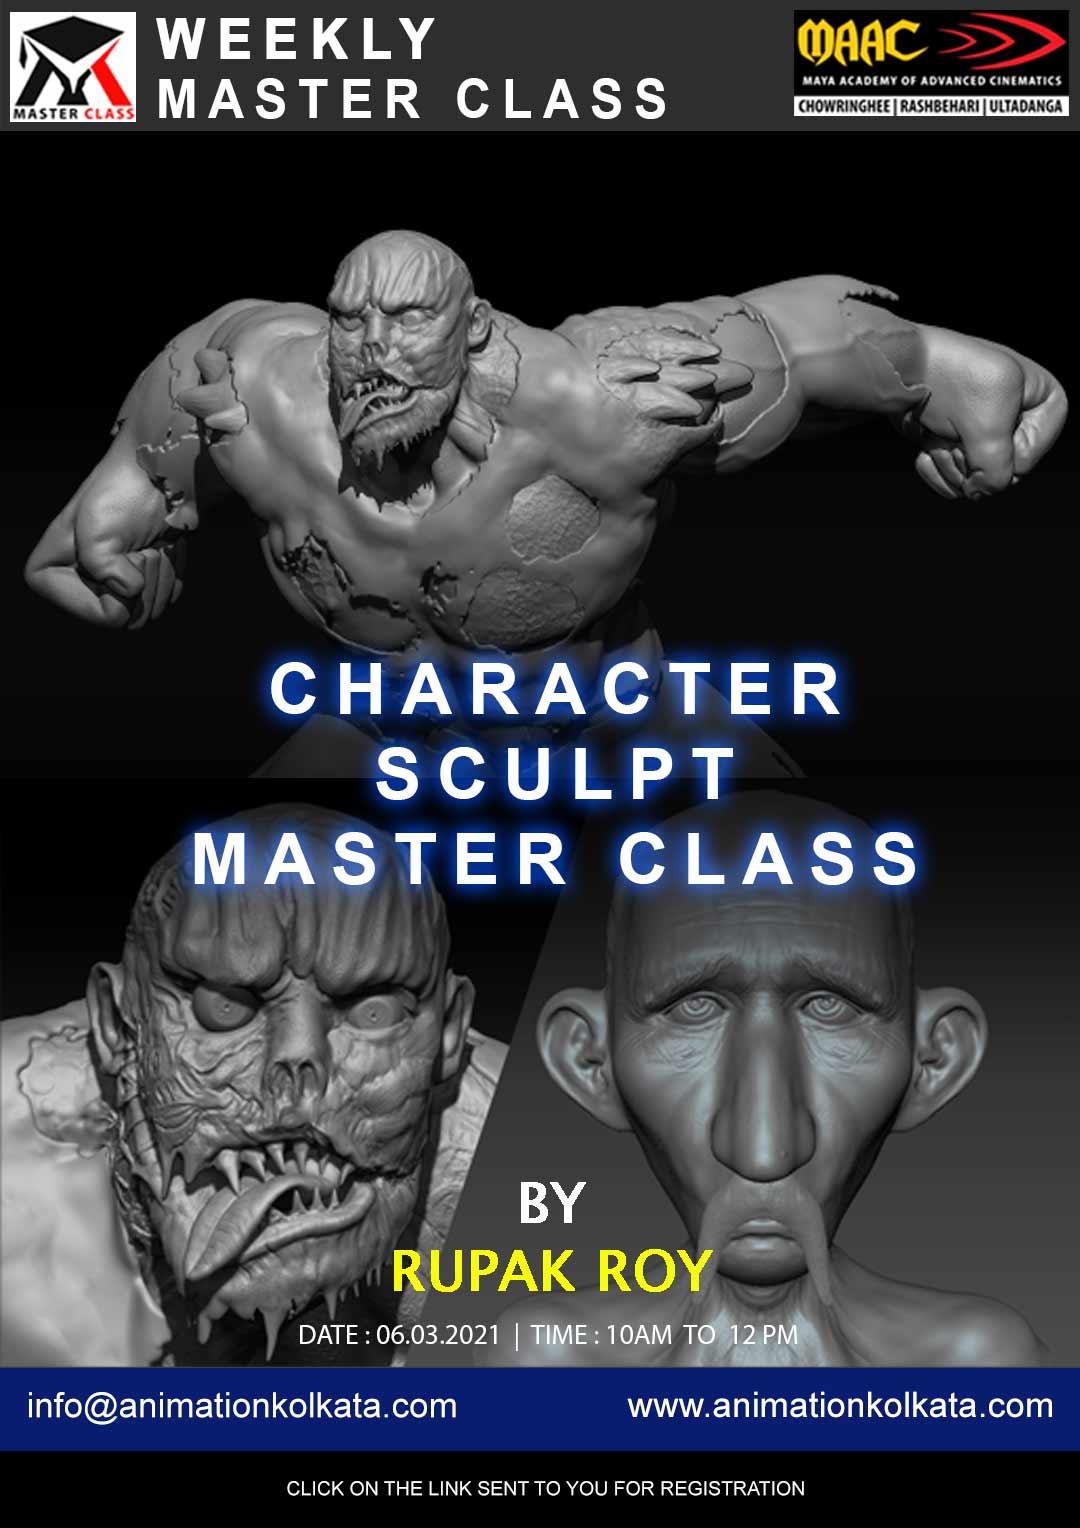 Weekly Master Class on Character Sculpting